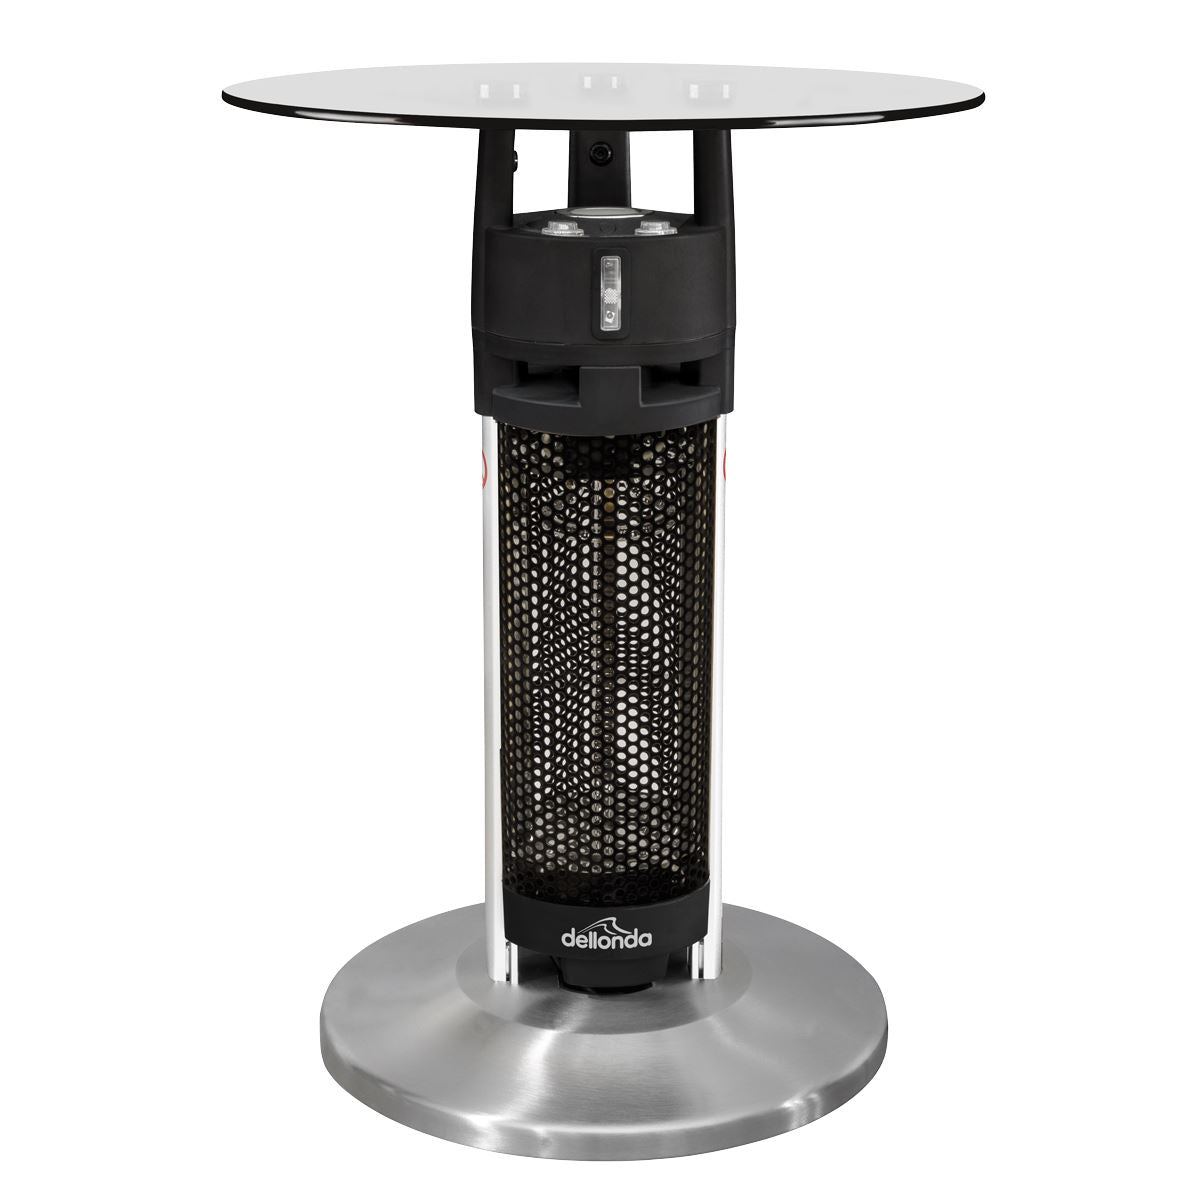 Dellonda Bistro Table with 1200W Heater, 65cm, Black/Stainless Steel